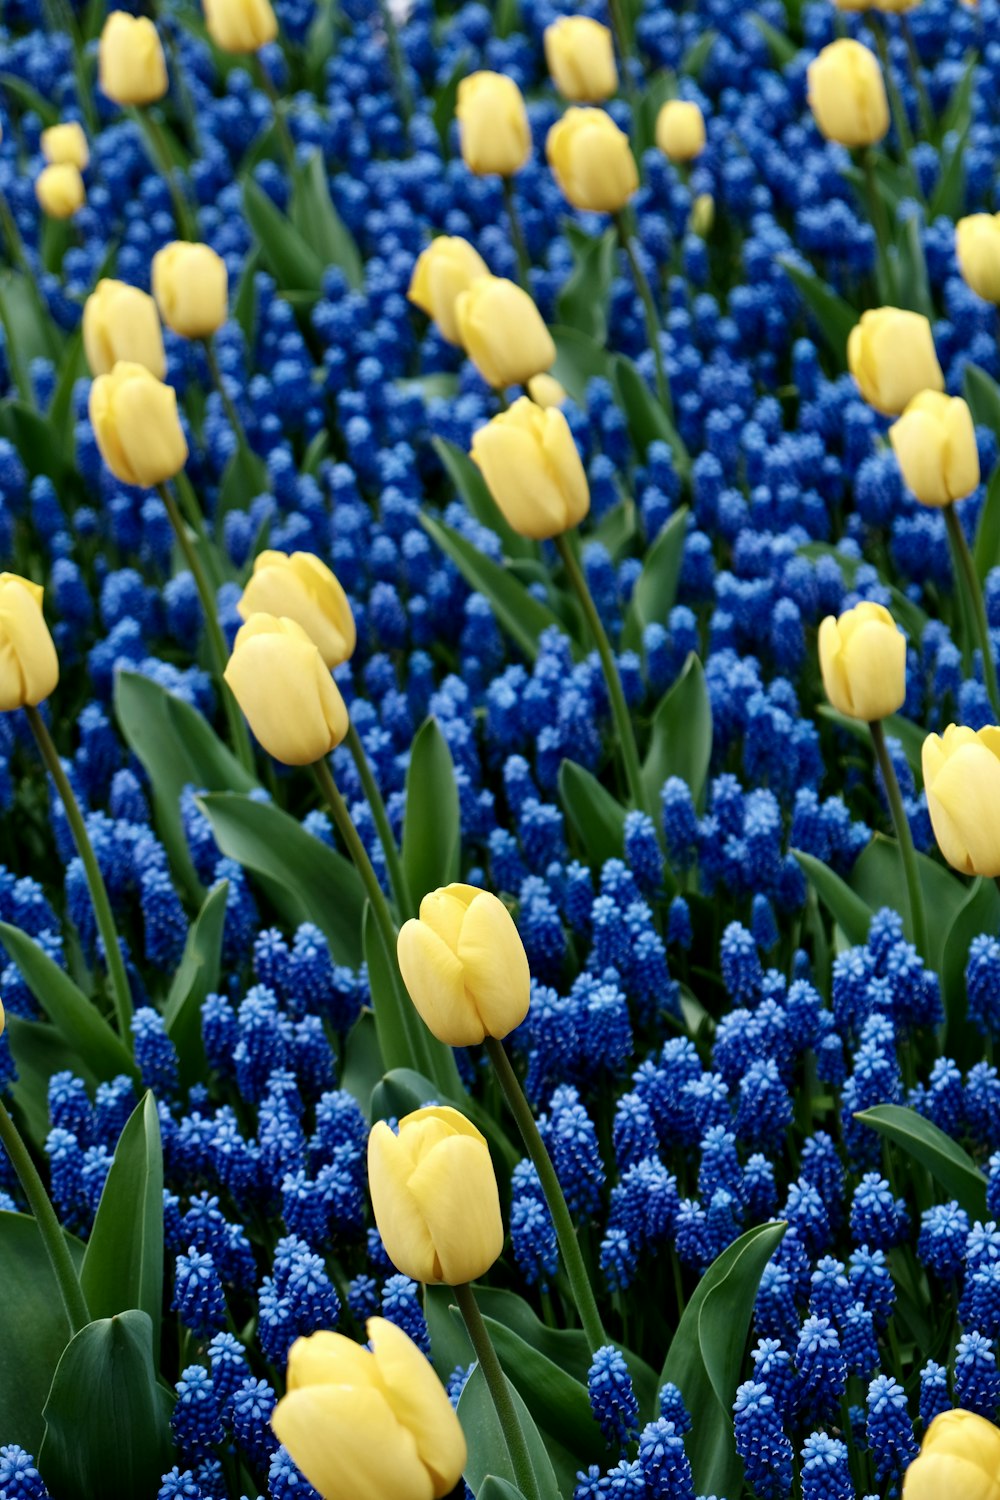 a field of yellow and blue flowers with green leaves